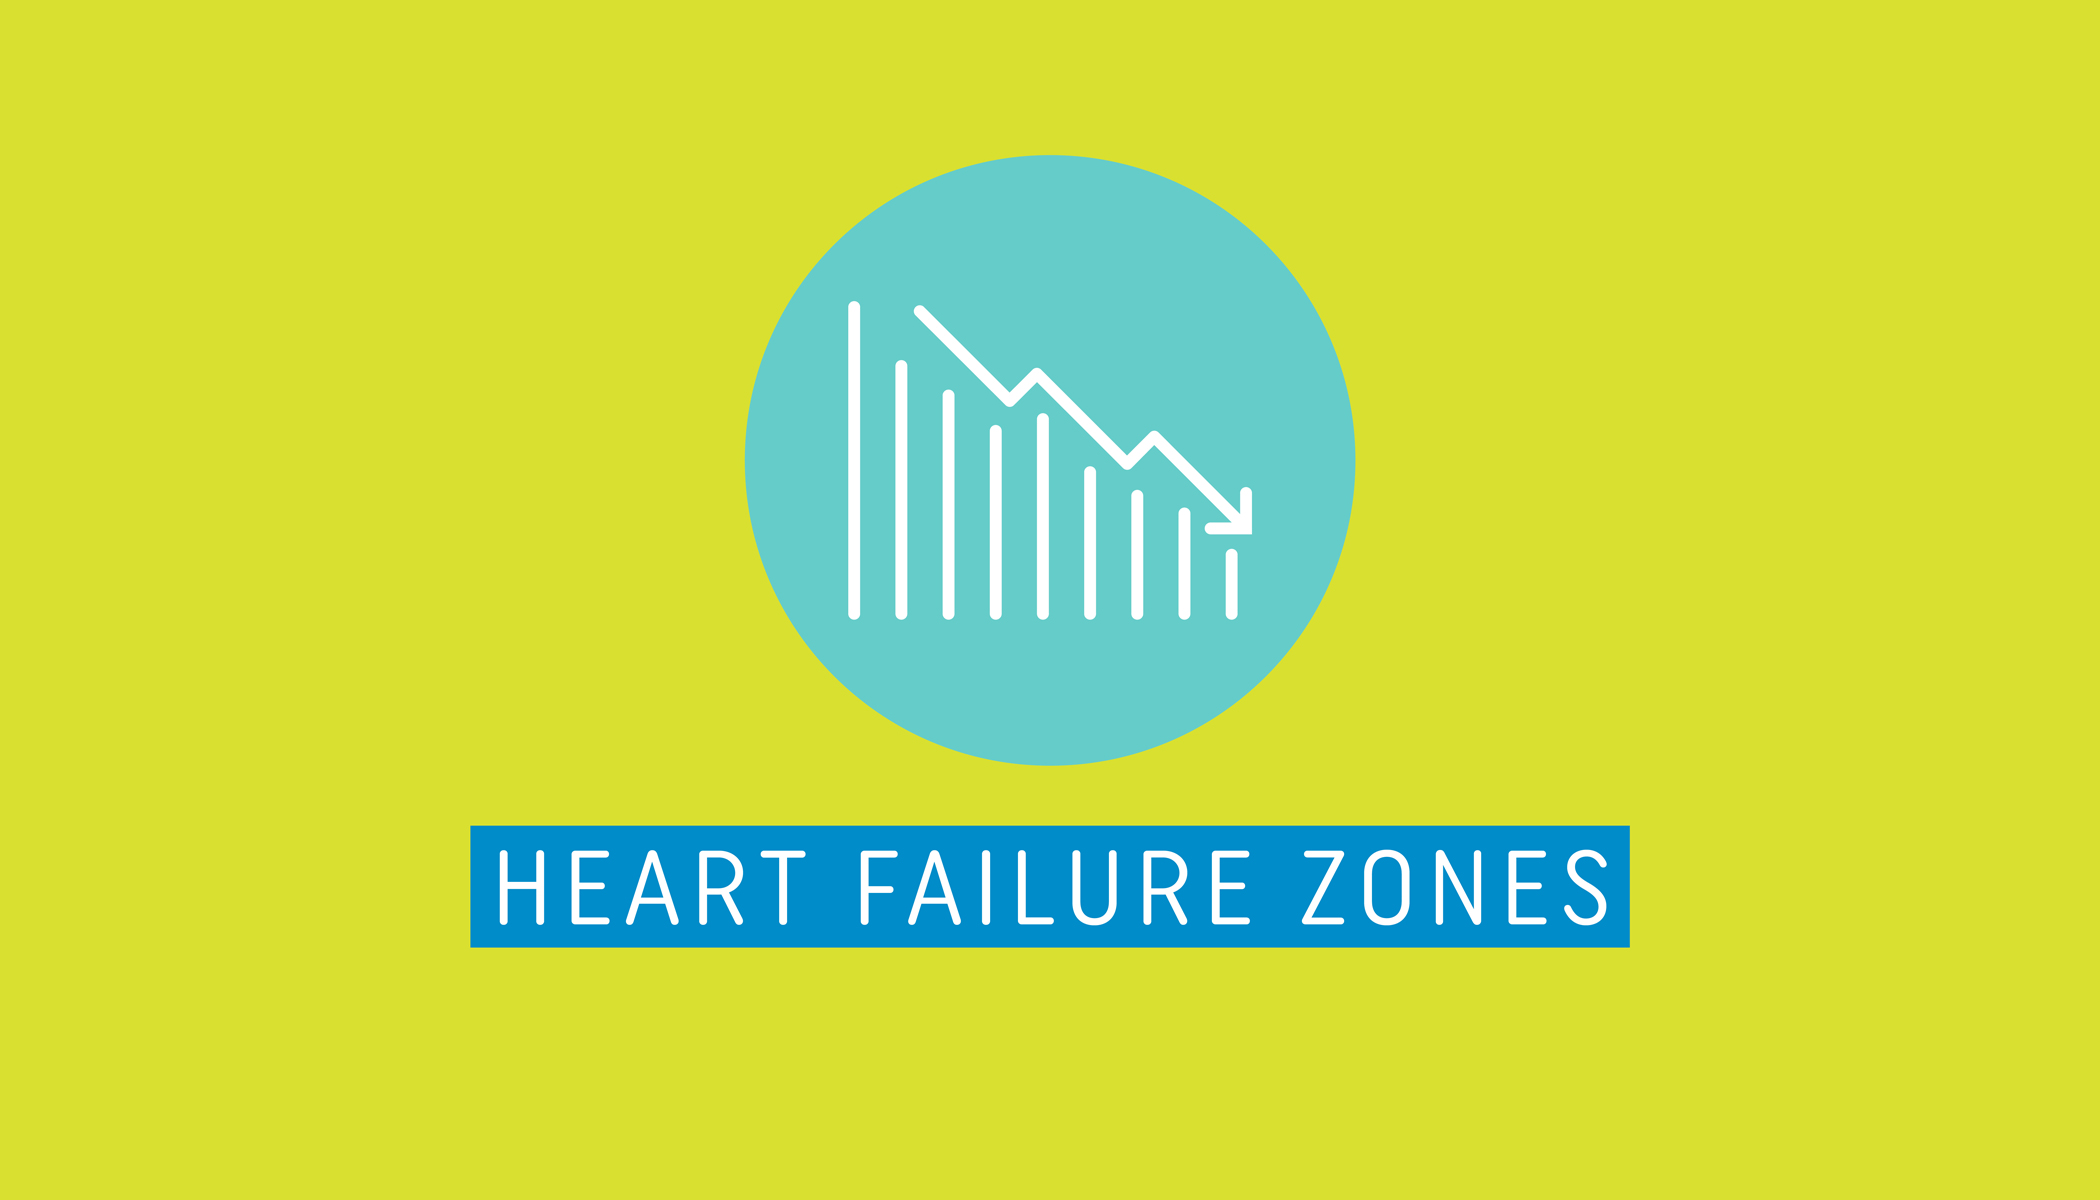 Heart Failure Exercise Guidelines and Zones